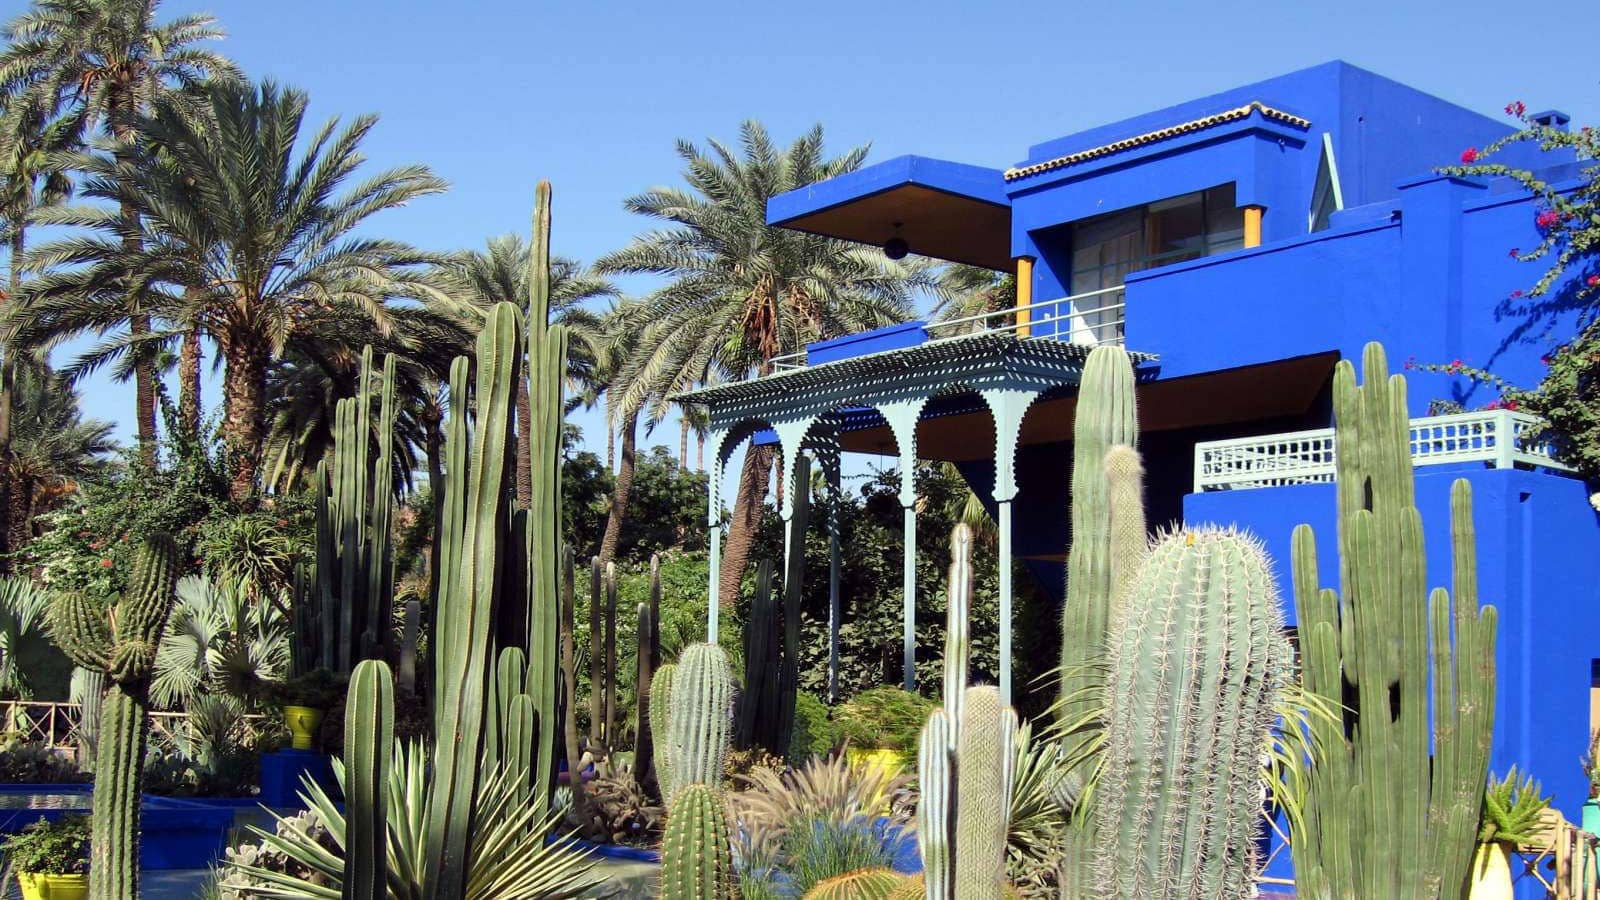 A garden of cacti and a bright blue painted building on Morocco